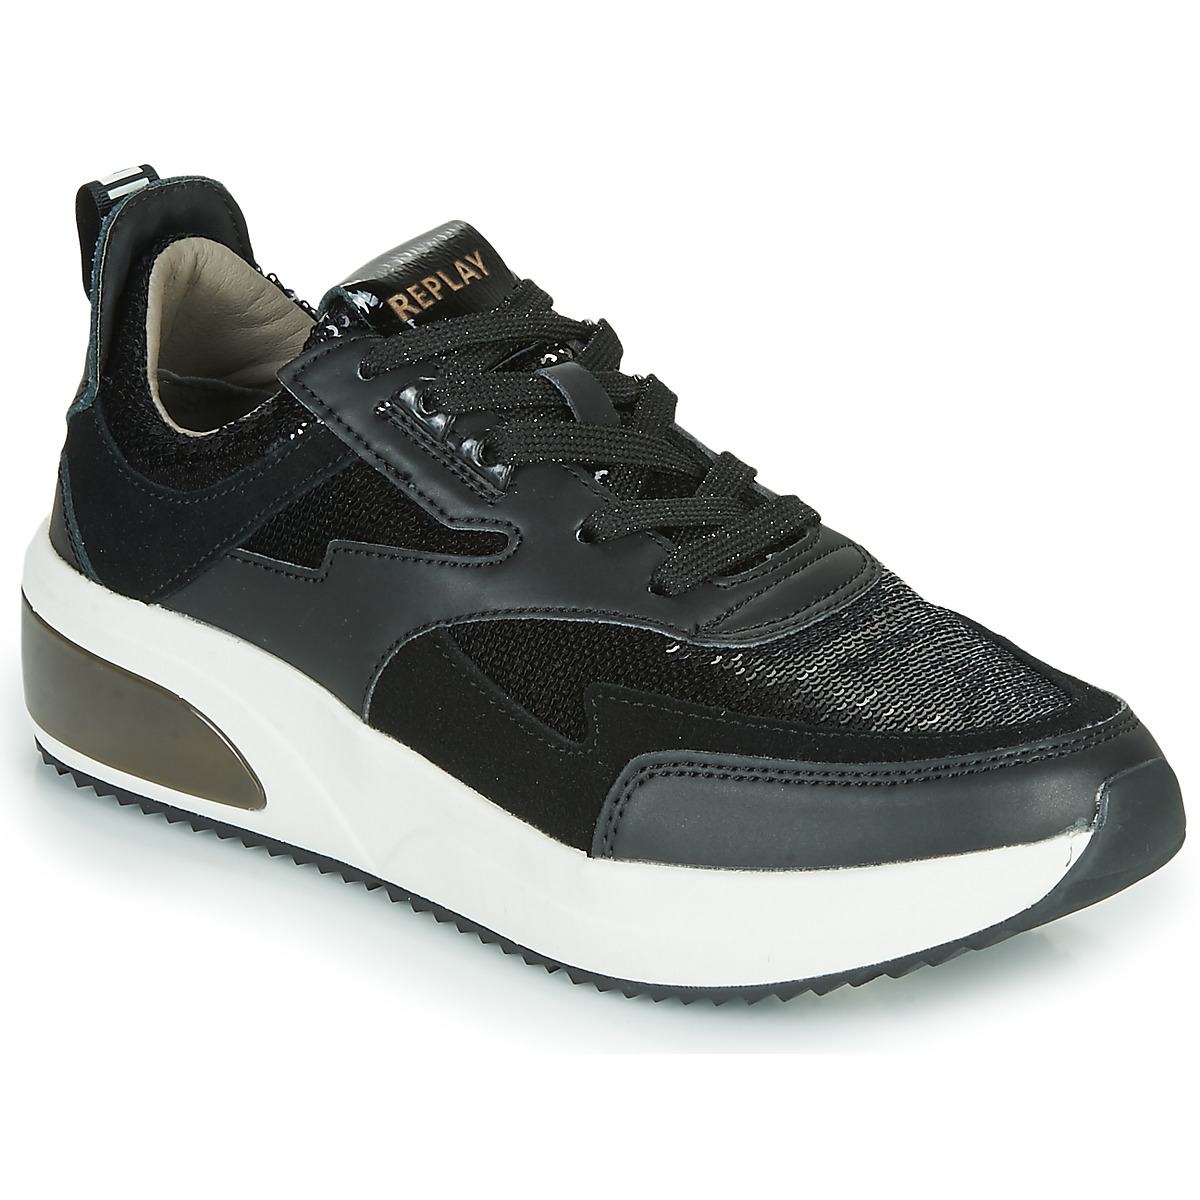 Scarpe Donna Sneakers basse Replay FLOW CREATION 